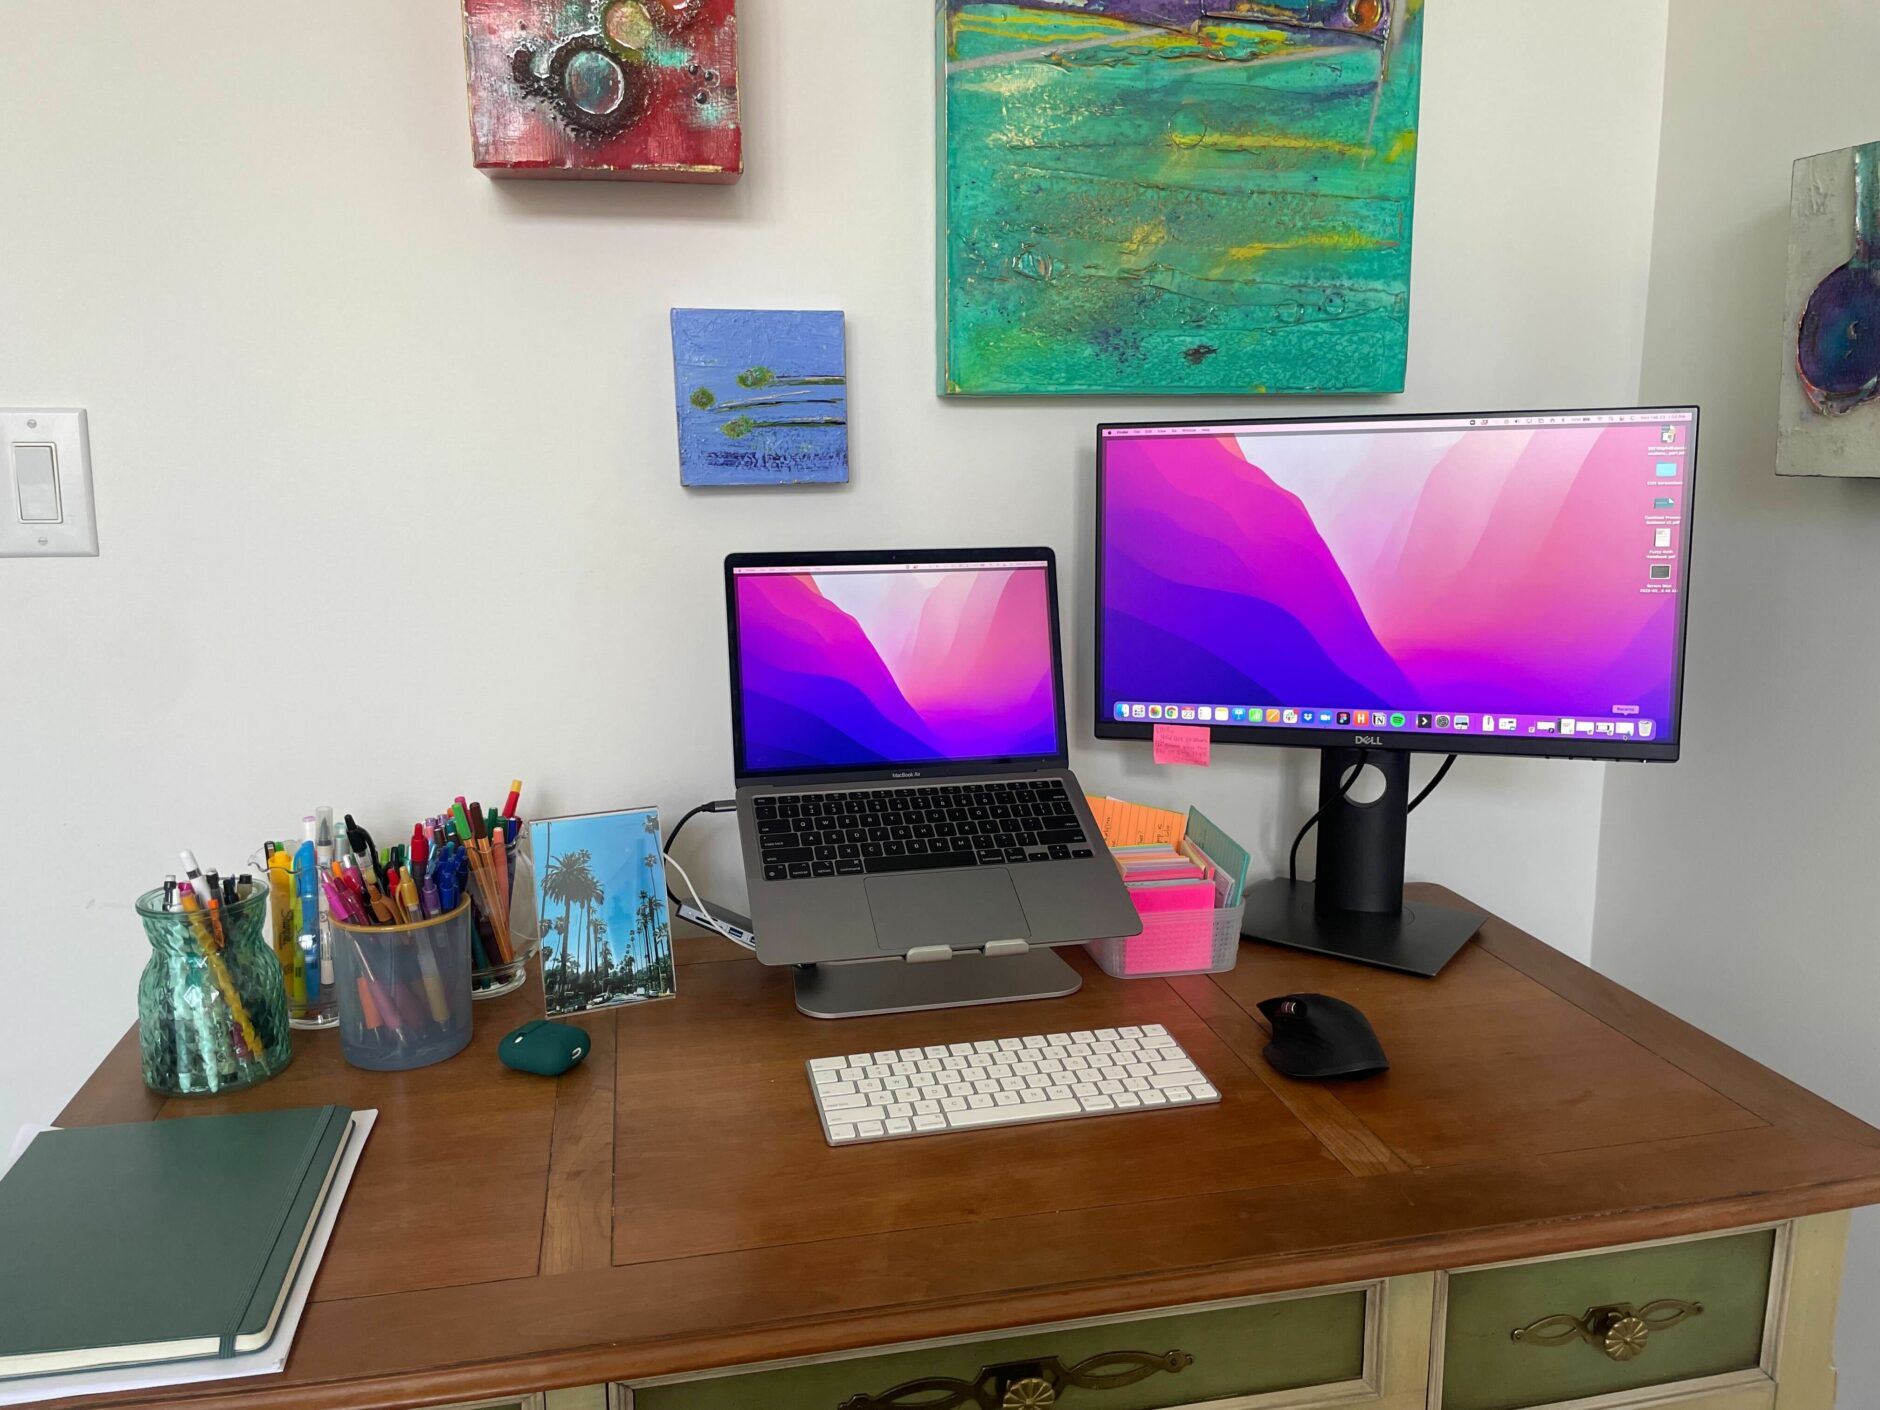 Desk setup with a monitor and laptop. There is artwork in the background and multiple colored pencils in cups on the desk.